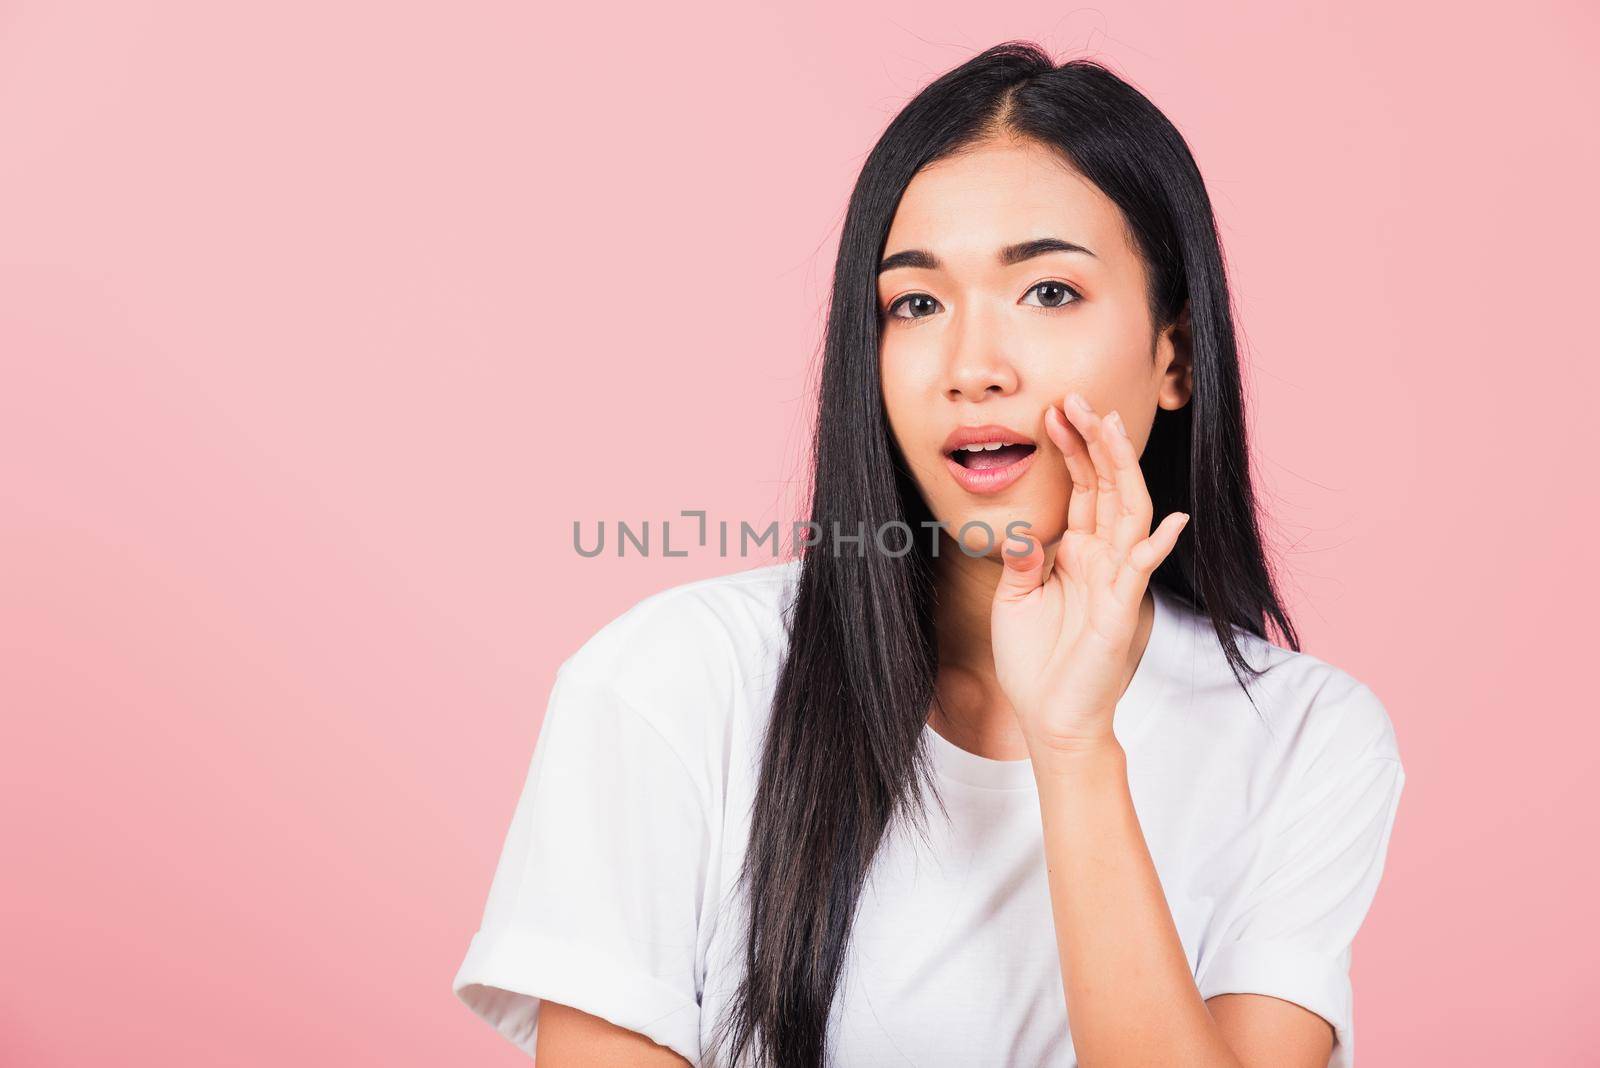 Asian happy portrait beautiful cute young woman teen standing hand on mouth talking whisper secret rumor studio shot isolated on pink background, Thai female looking to camera with copy space